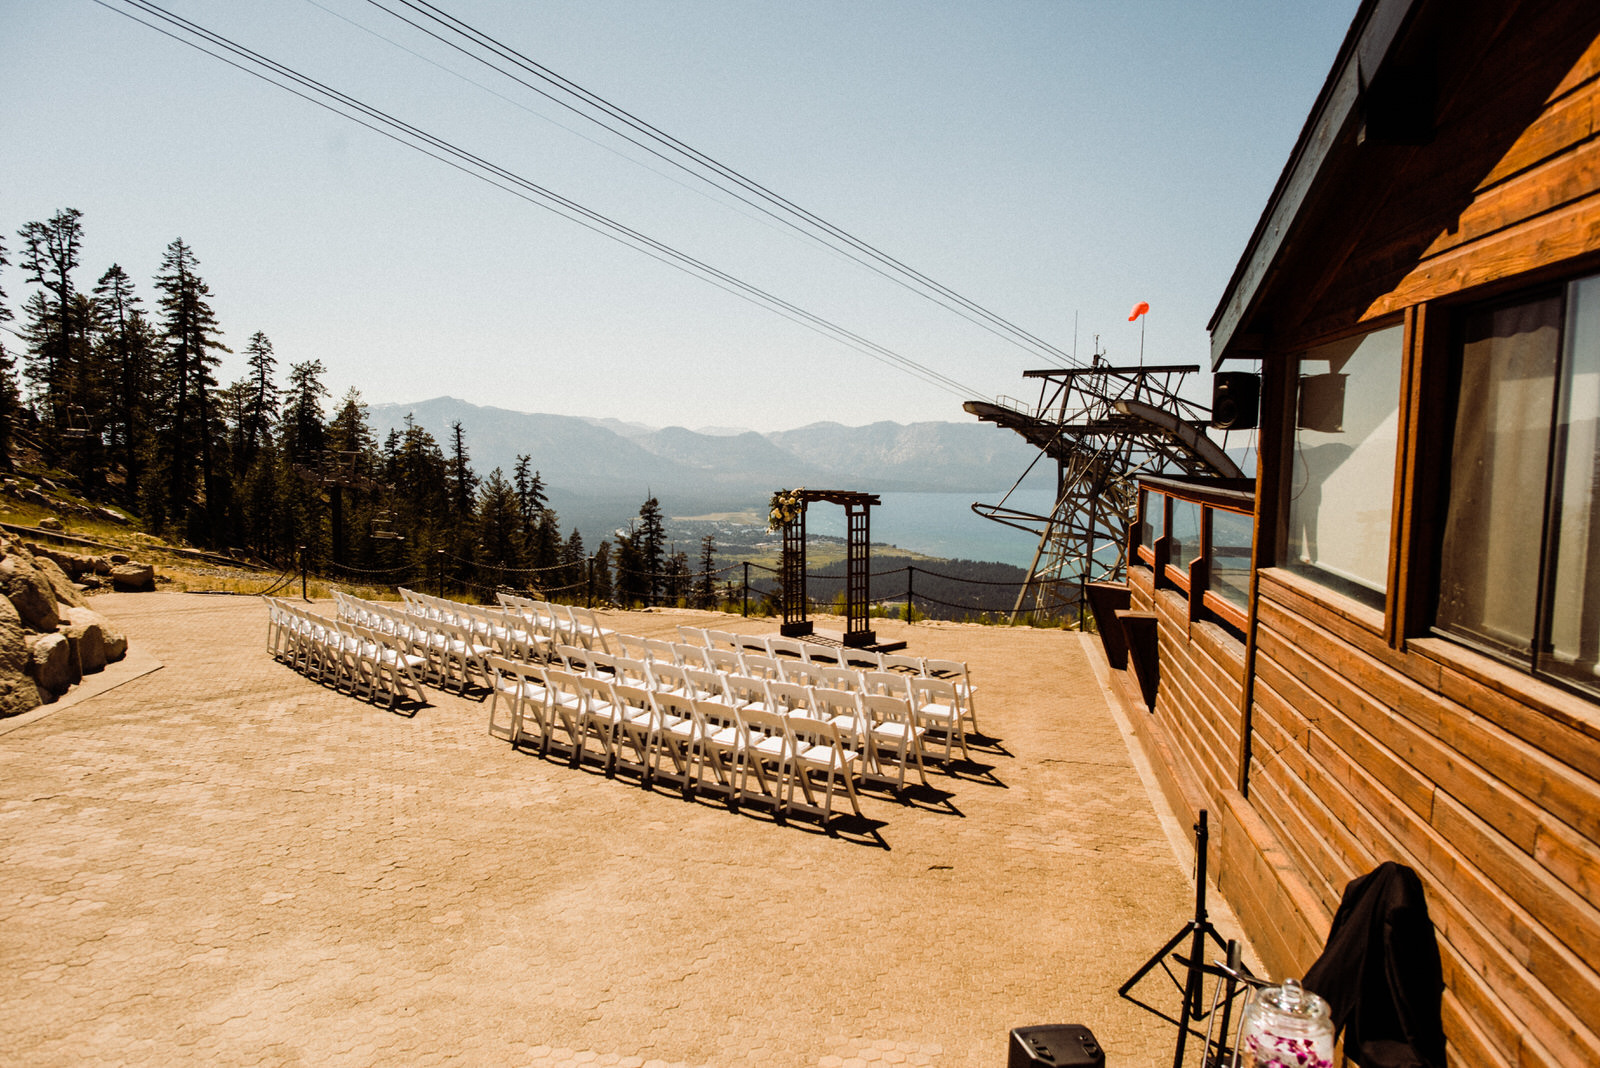 Ceremony Site at Lakeview Lodge in South Lake Tahoe, California